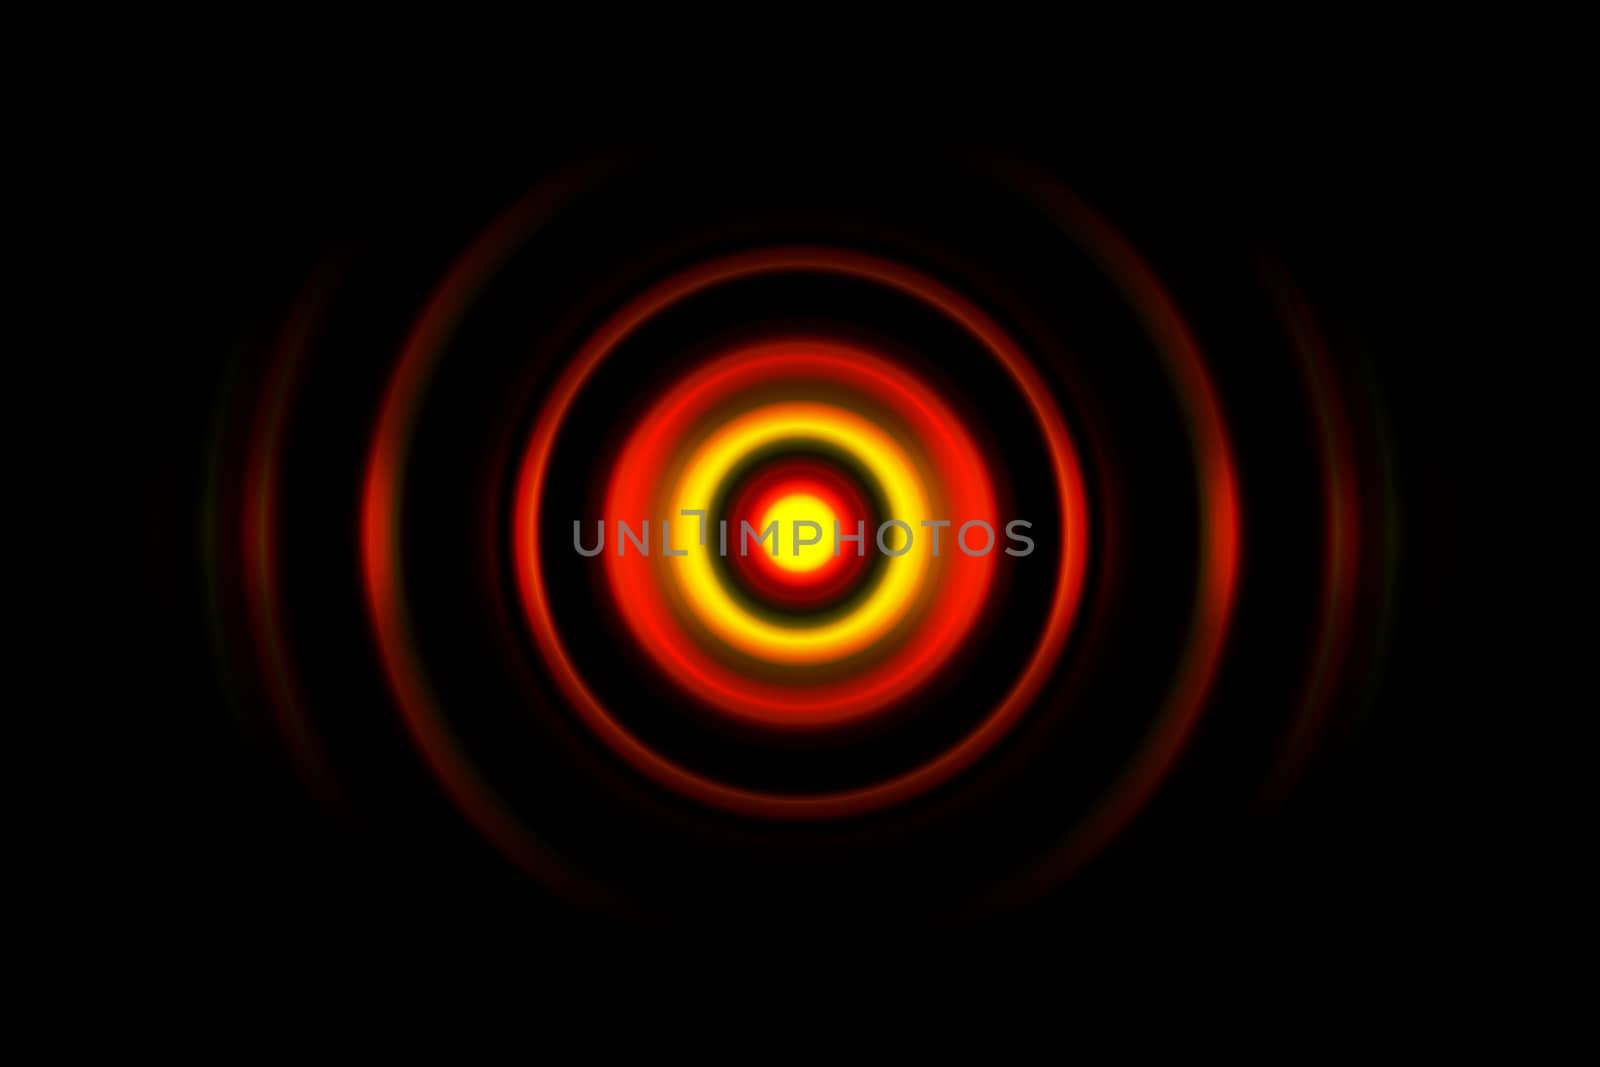 Red digital sound wave or circle signal, abstract background